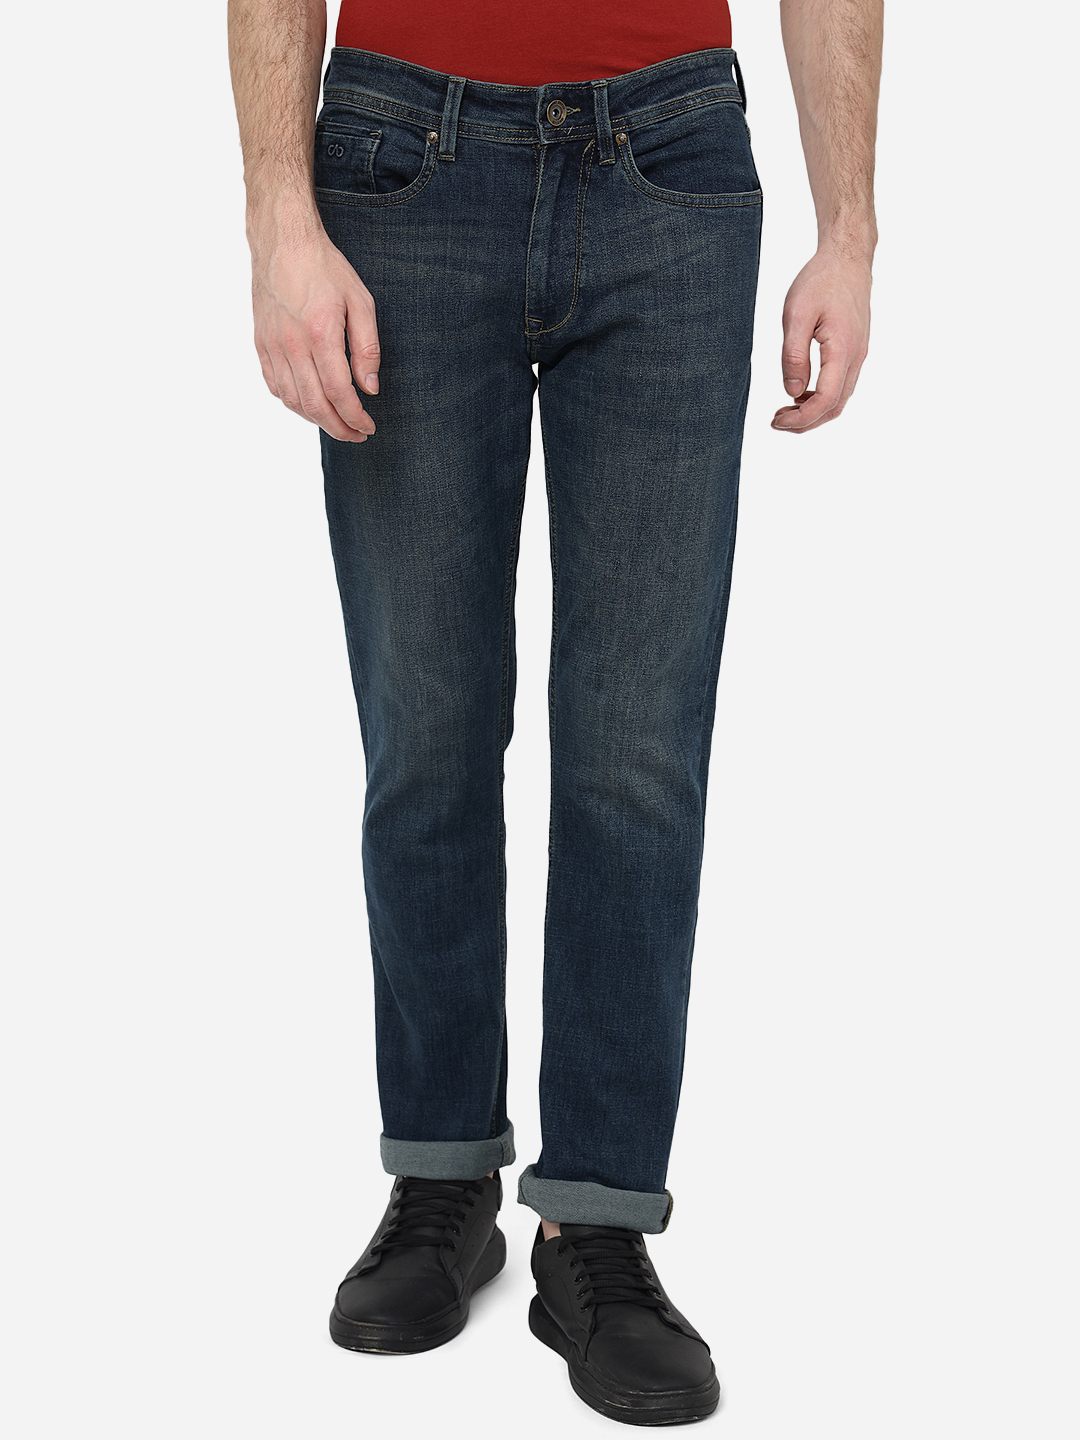 Update more than 164 straight fit jeans mens india super hot